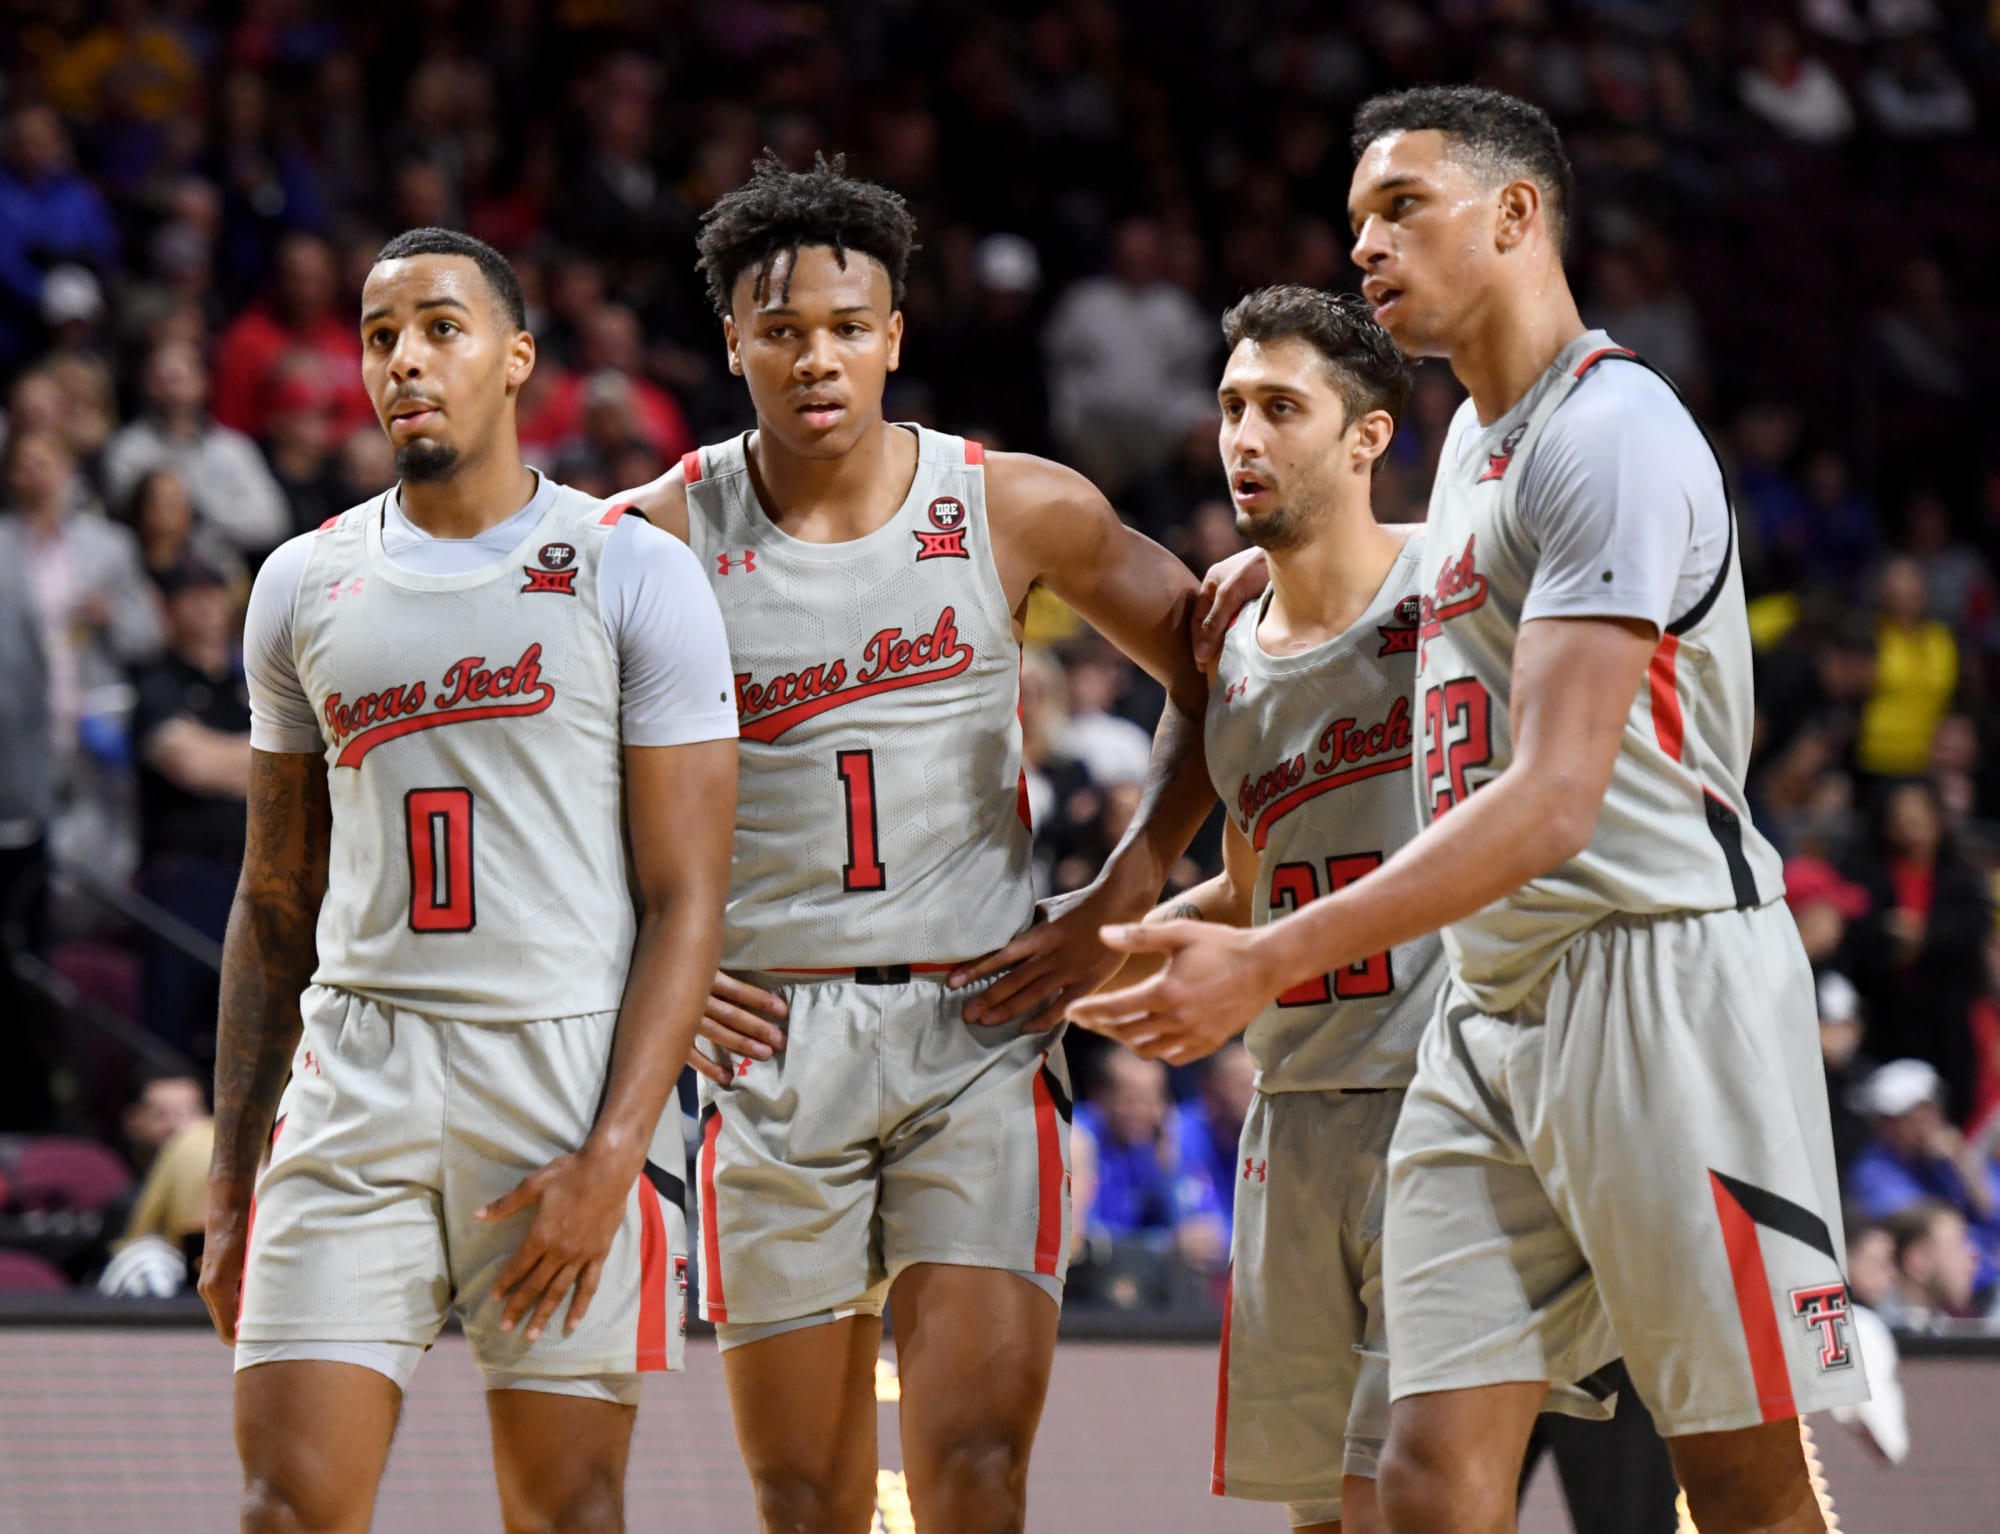 Texas Tech basketball rises slightly in rankings for secondstraight week